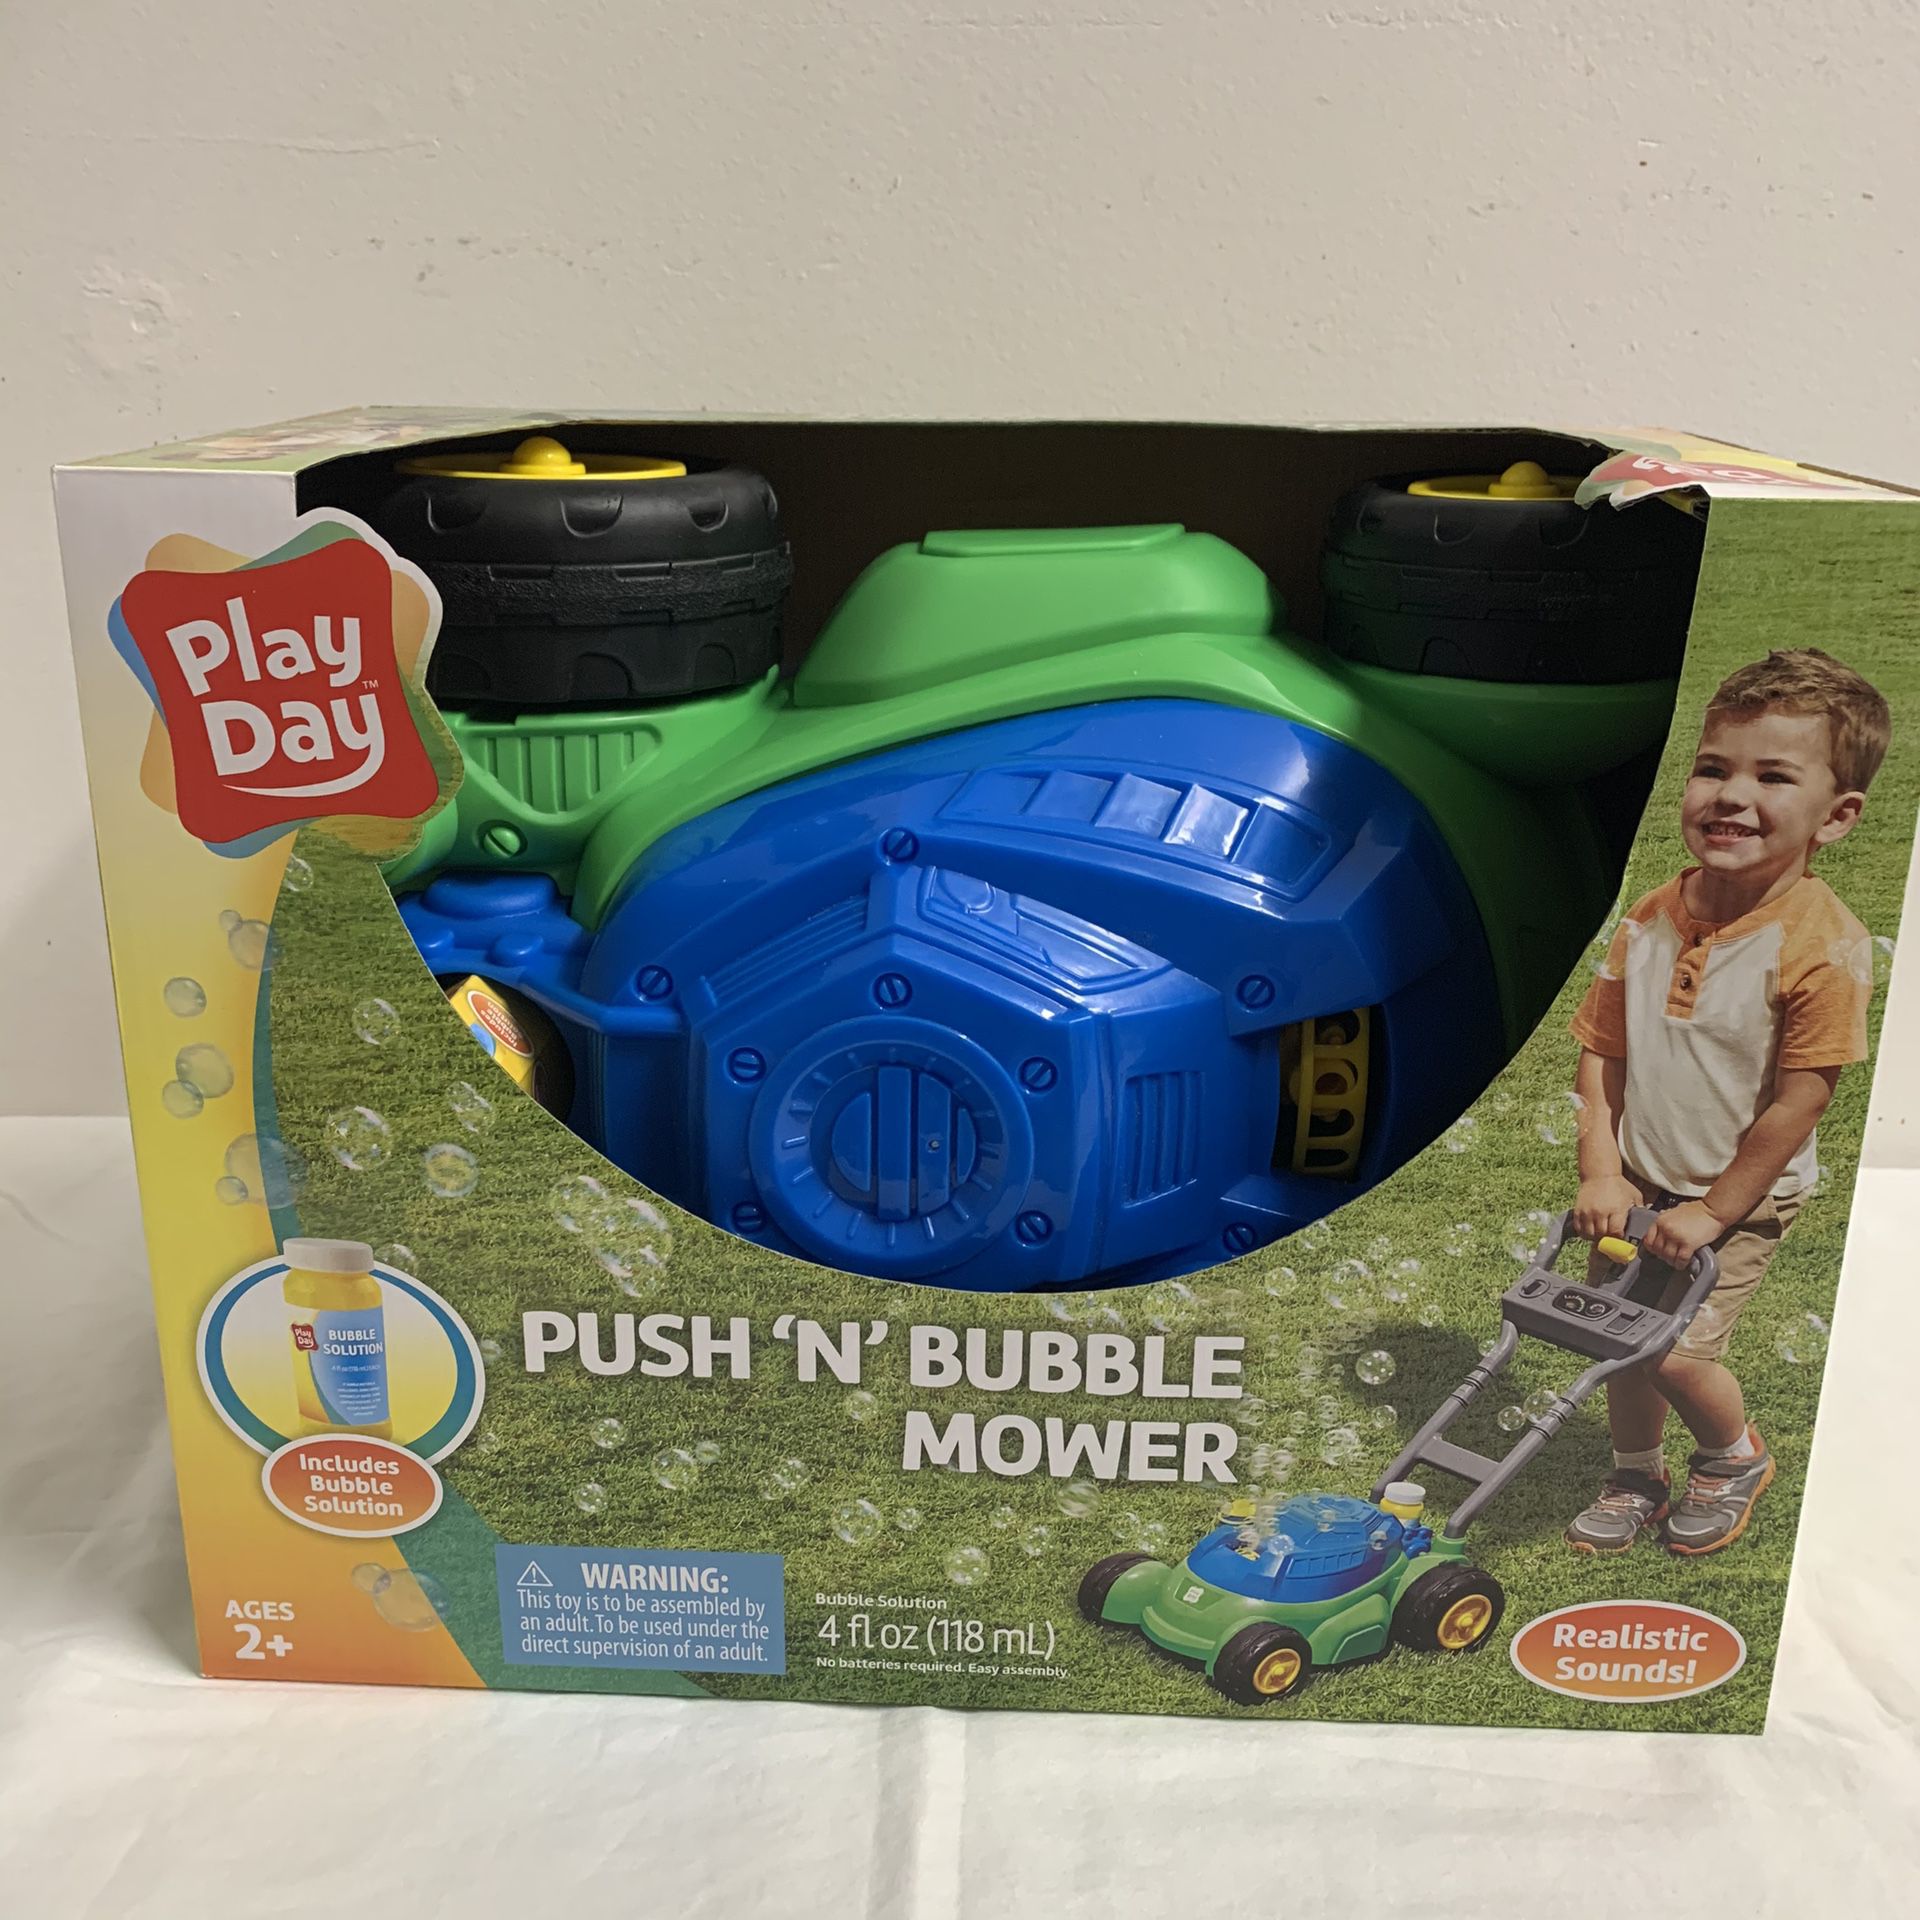 Play Day Push N Bubble Mower Lawn Toy Kids Pretend Play Yard Outdoor Outside NEW